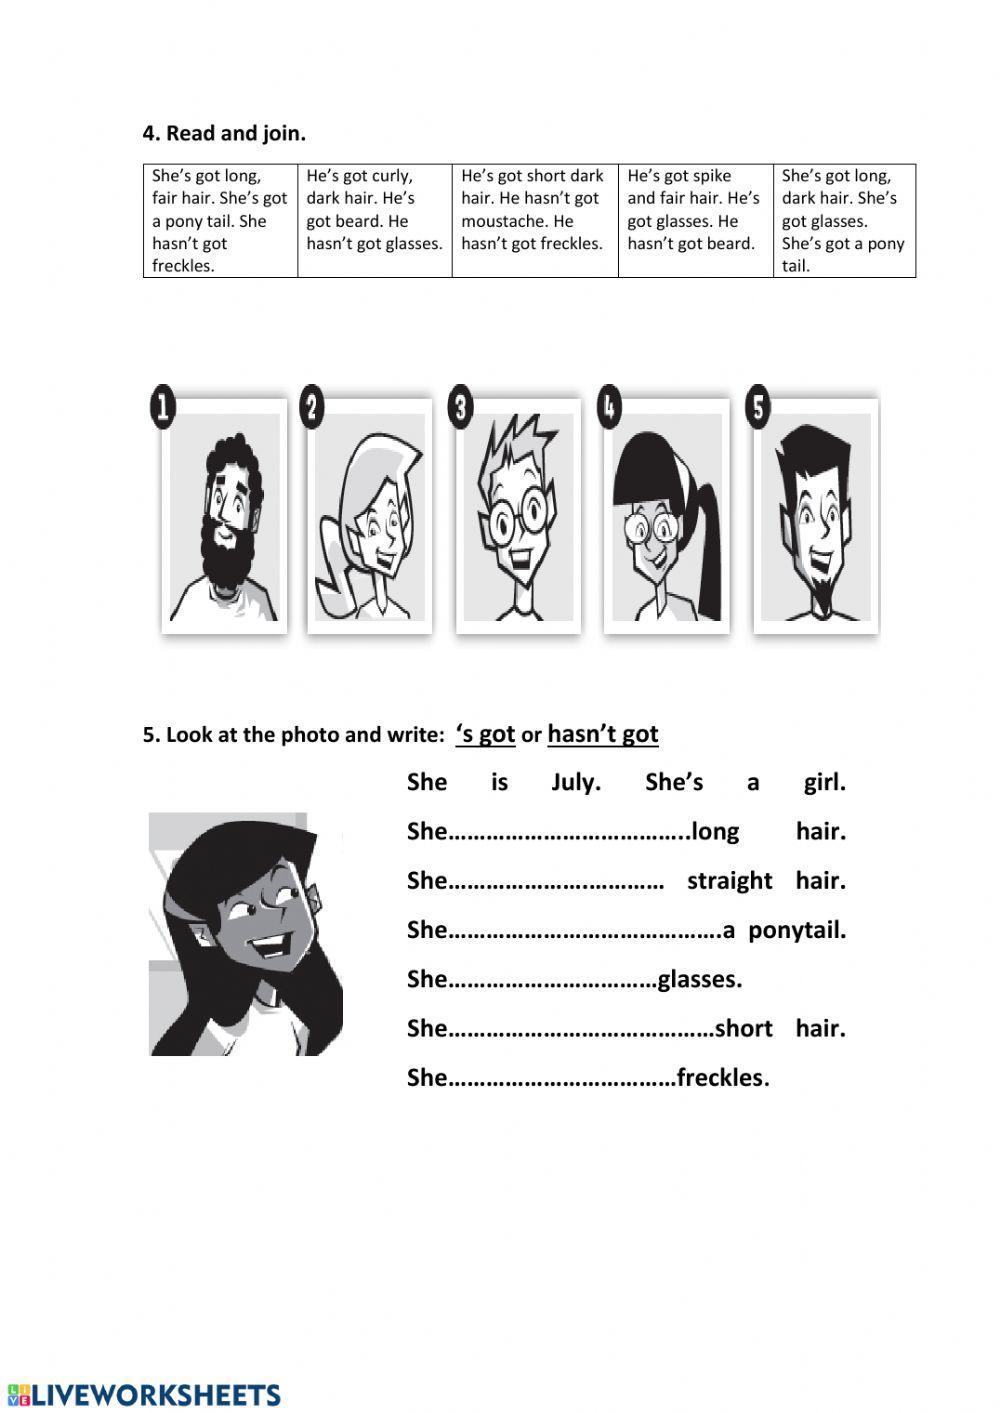 Physical Appearance Interactive Exercise Live Worksheets